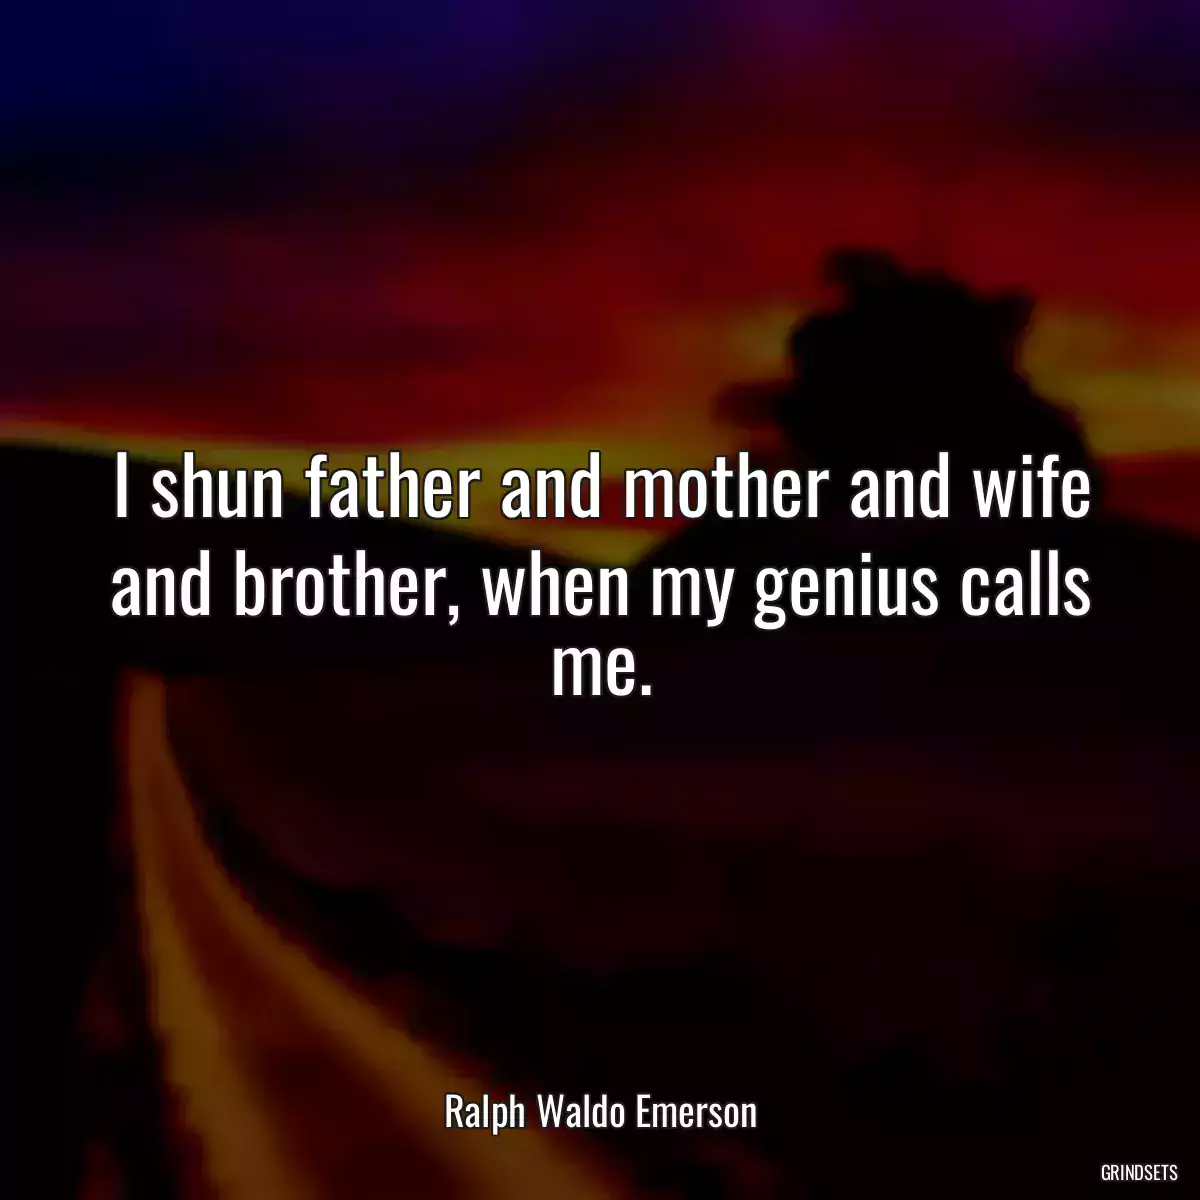 I shun father and mother and wife and brother, when my genius calls me.